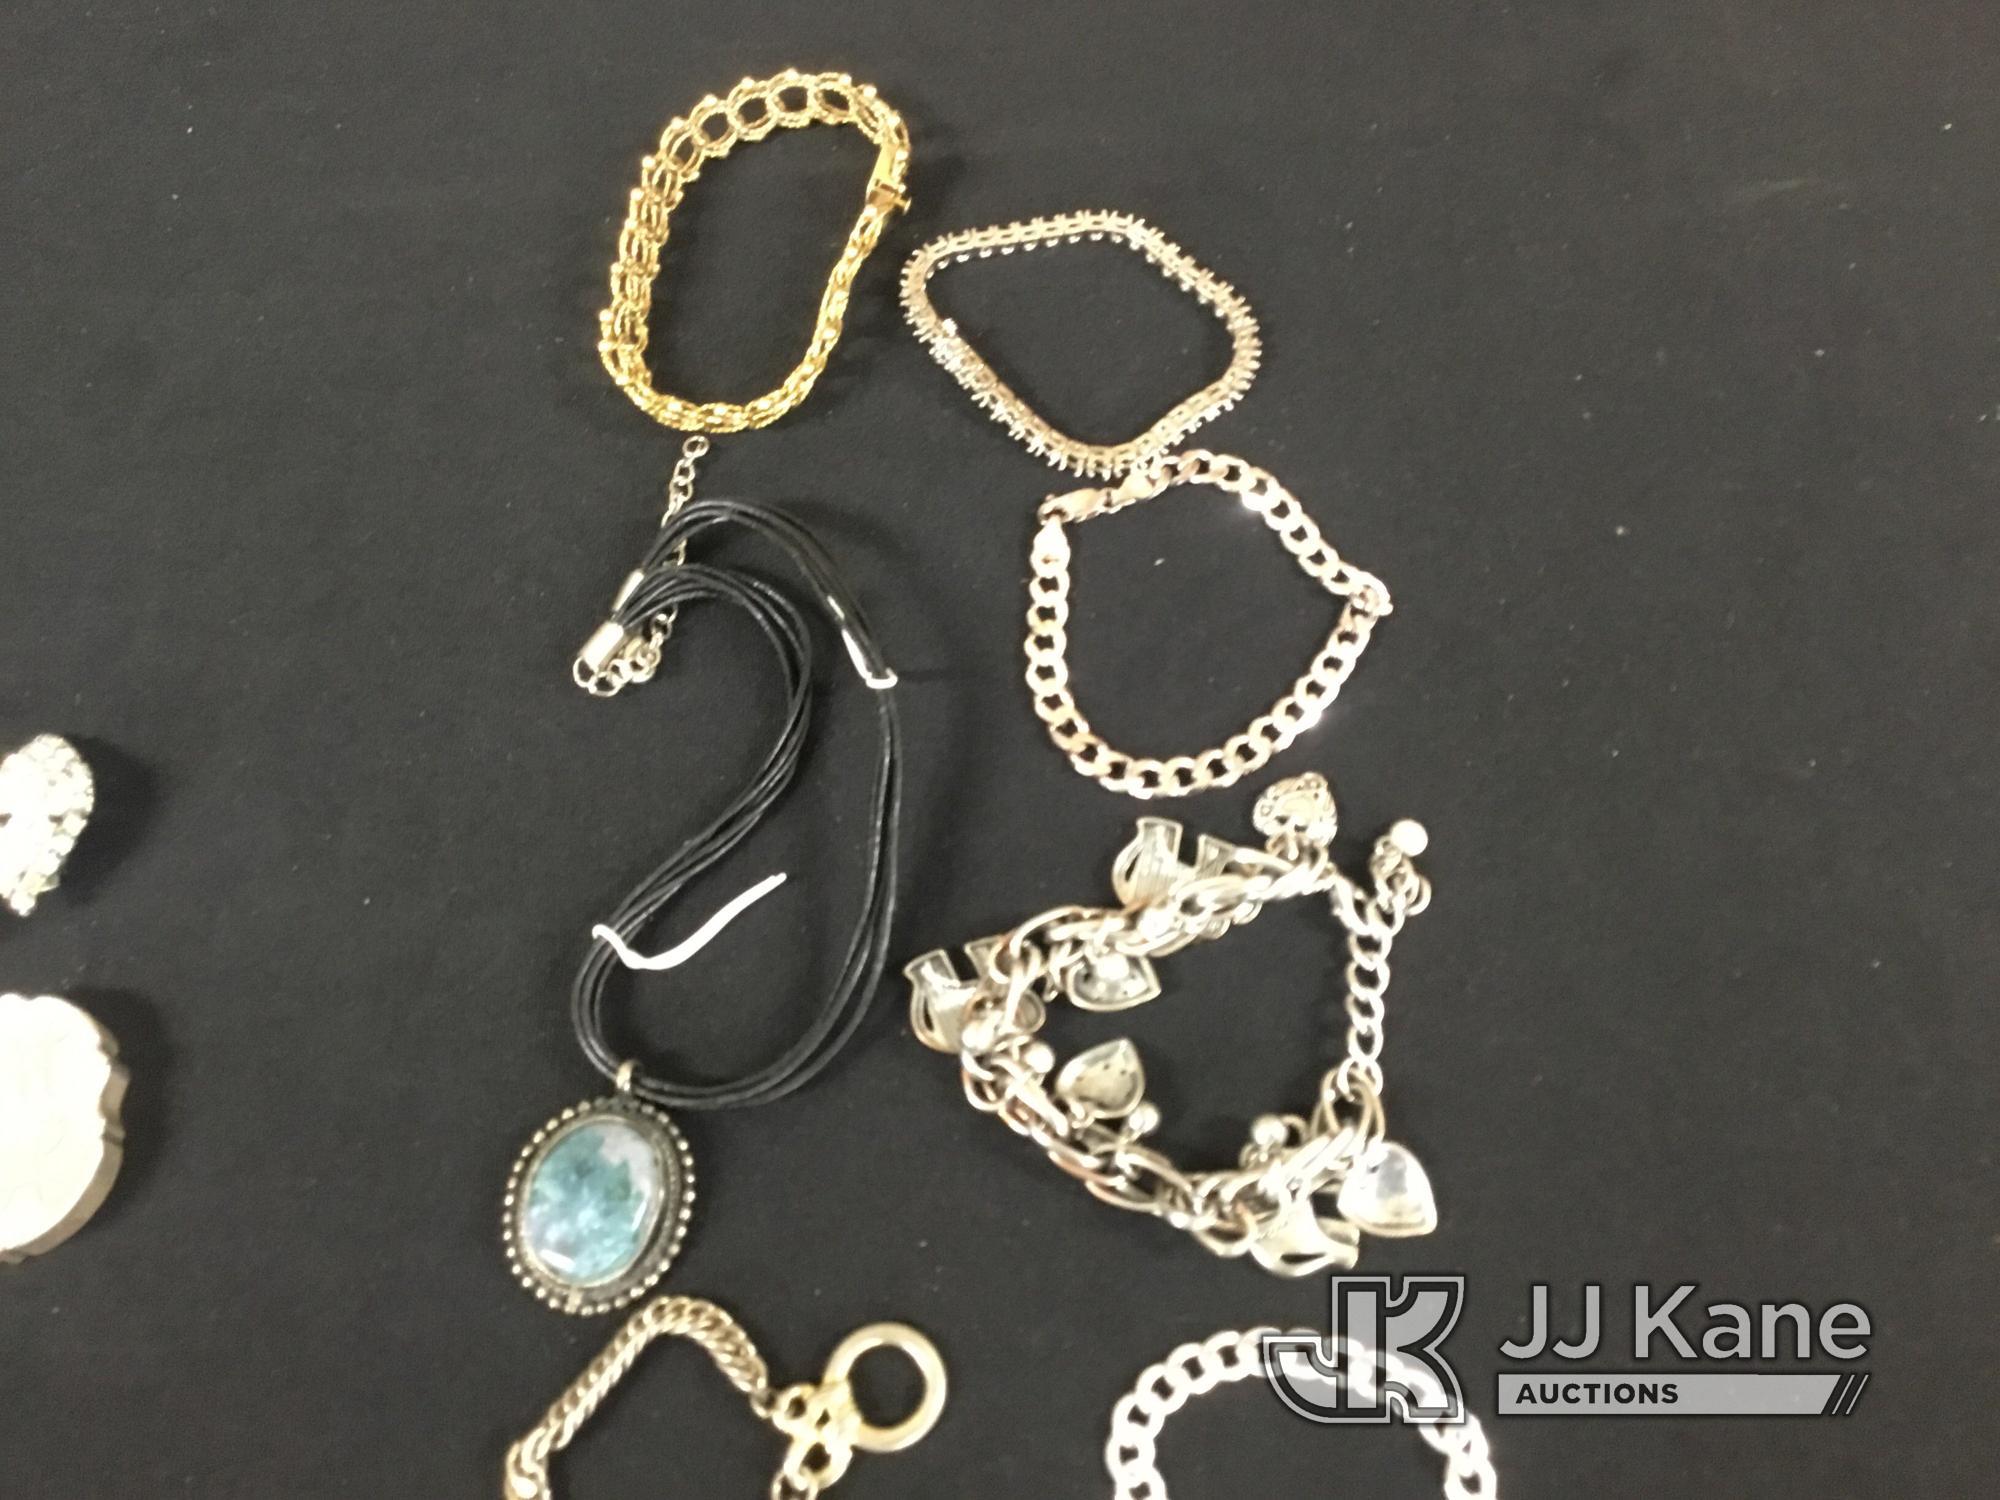 (Jurupa Valley, CA) Jewelry | possibly costume jewelry | authenticity unknown (Used) NOTE: This unit